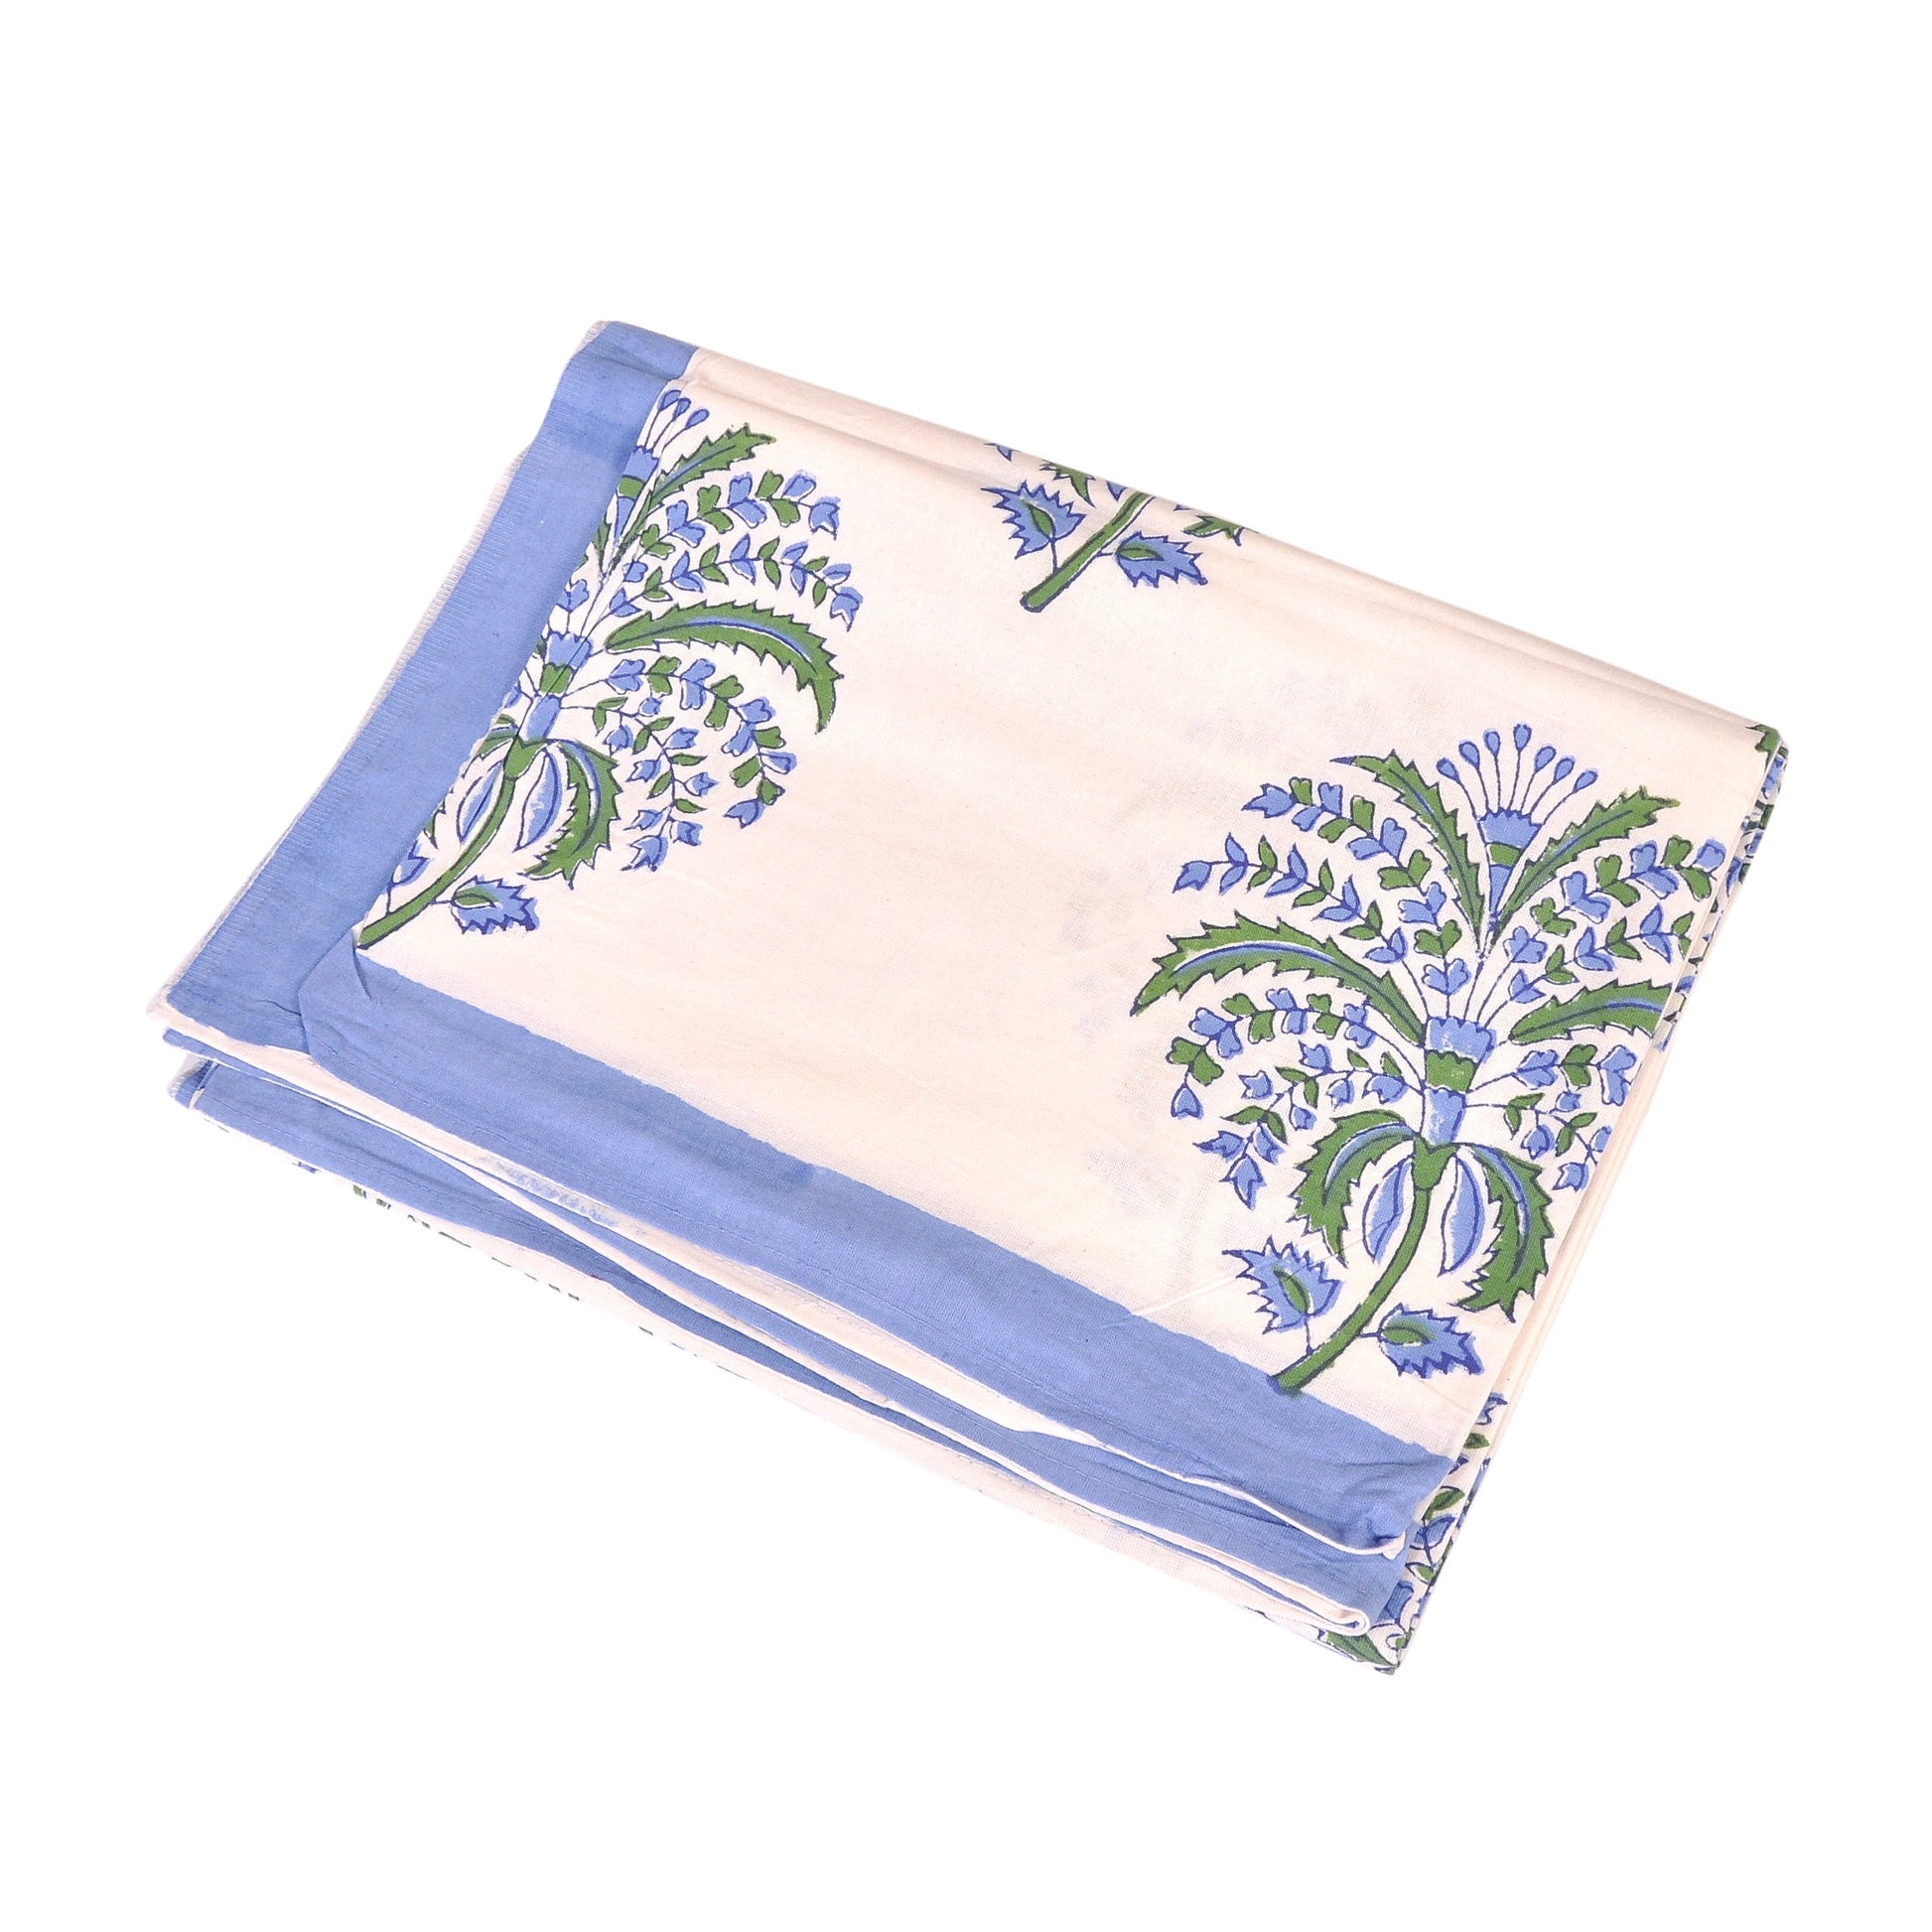 Blue and Green Floral Spray Cotton Tablecloth Small Joanna Wood Shop